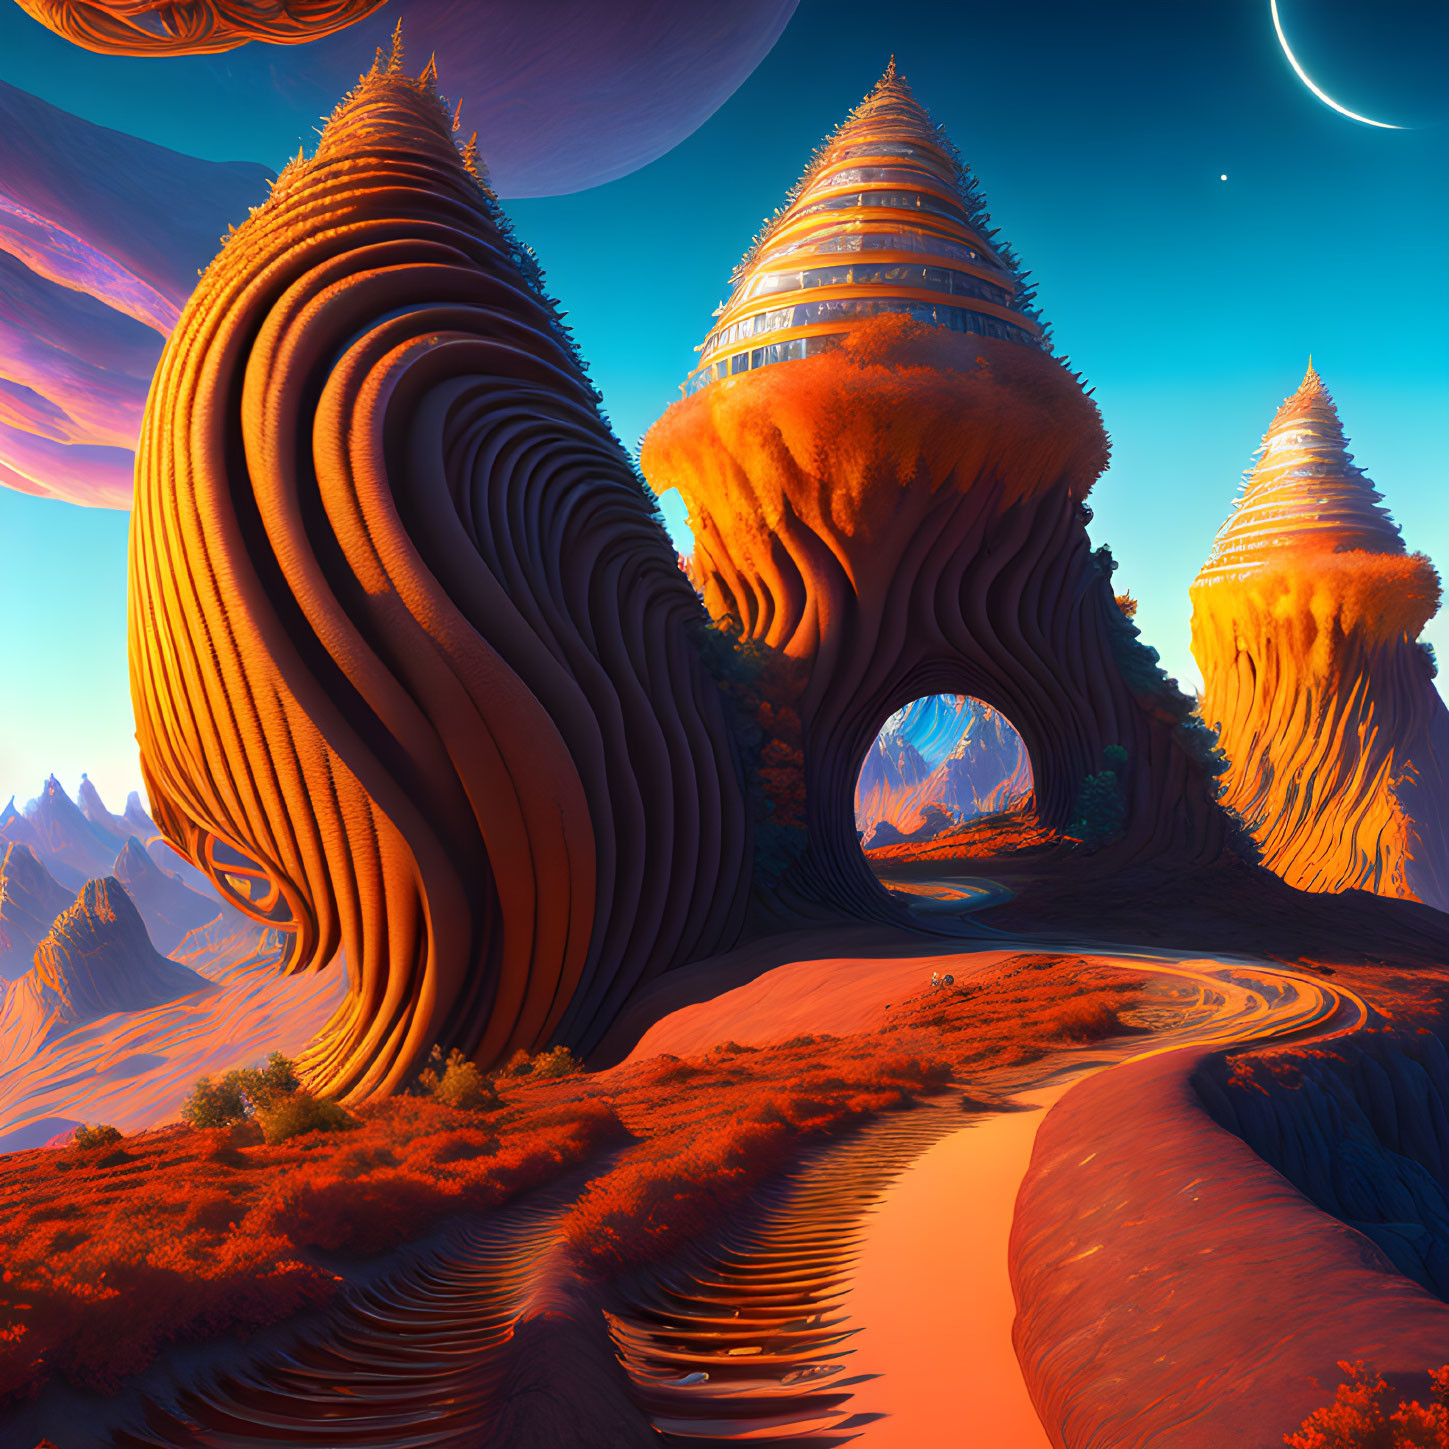 Surreal landscape with swirling rock formations and futuristic building under blue sky